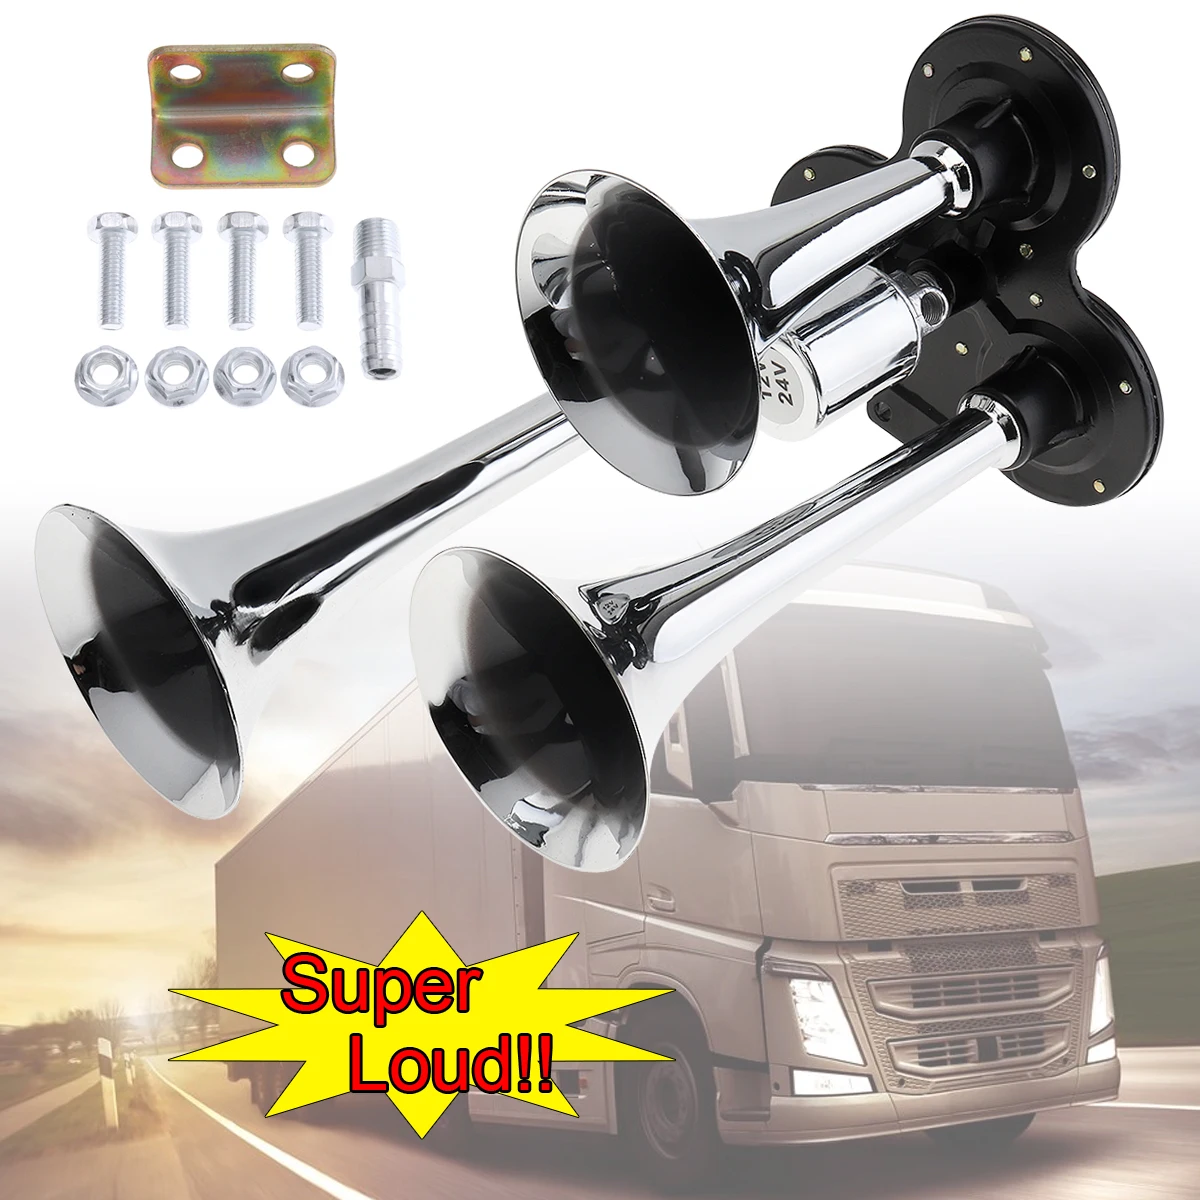 178DB Super Loud Car Horn 12V Four Trumpet Electronically Controlled Vehicle  Car Air Horn for Car Truck Boat Motorcycle - AliExpress